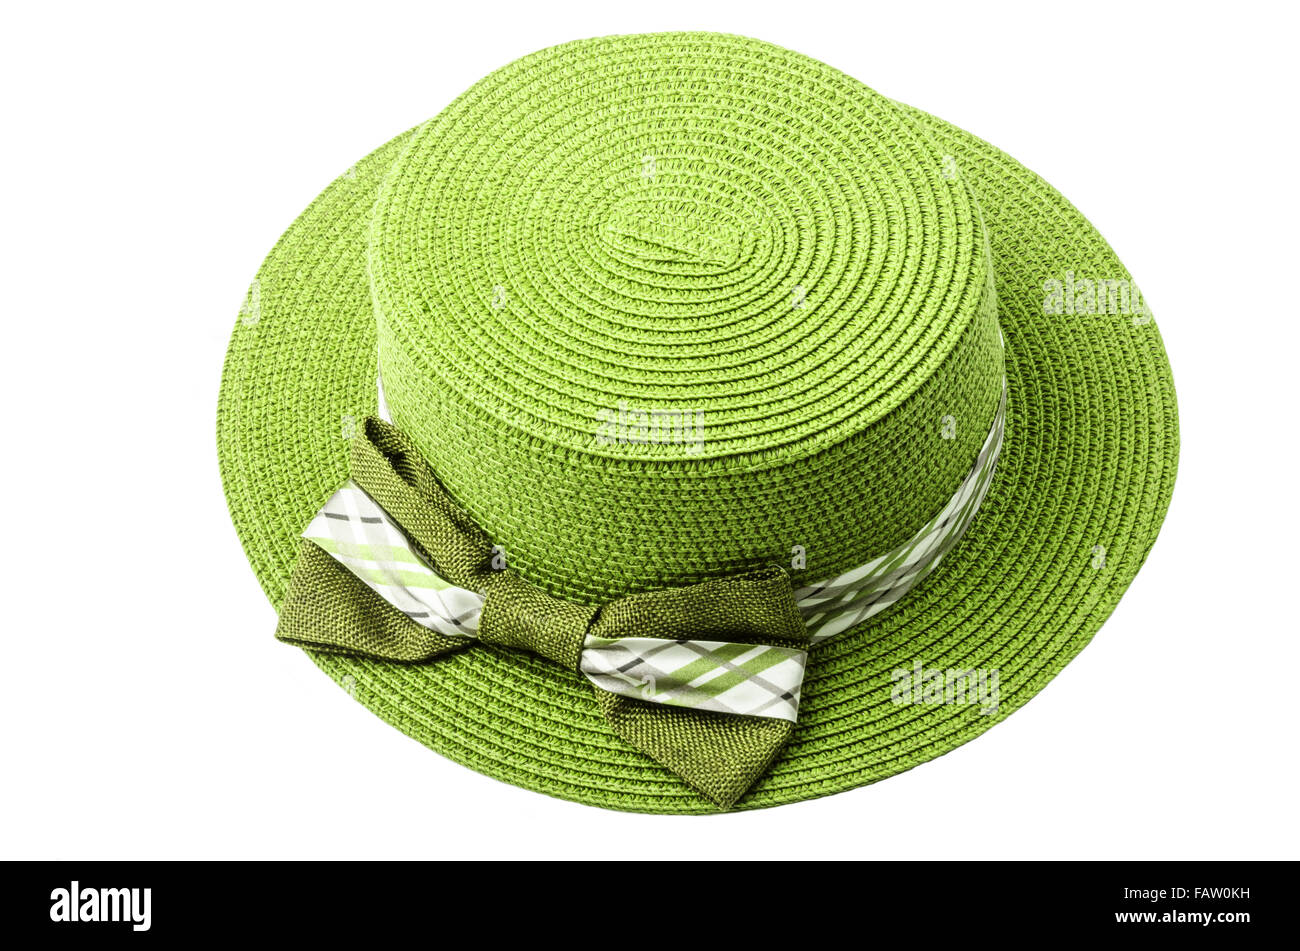 Straw green hat isolated on white background. Stock Photo